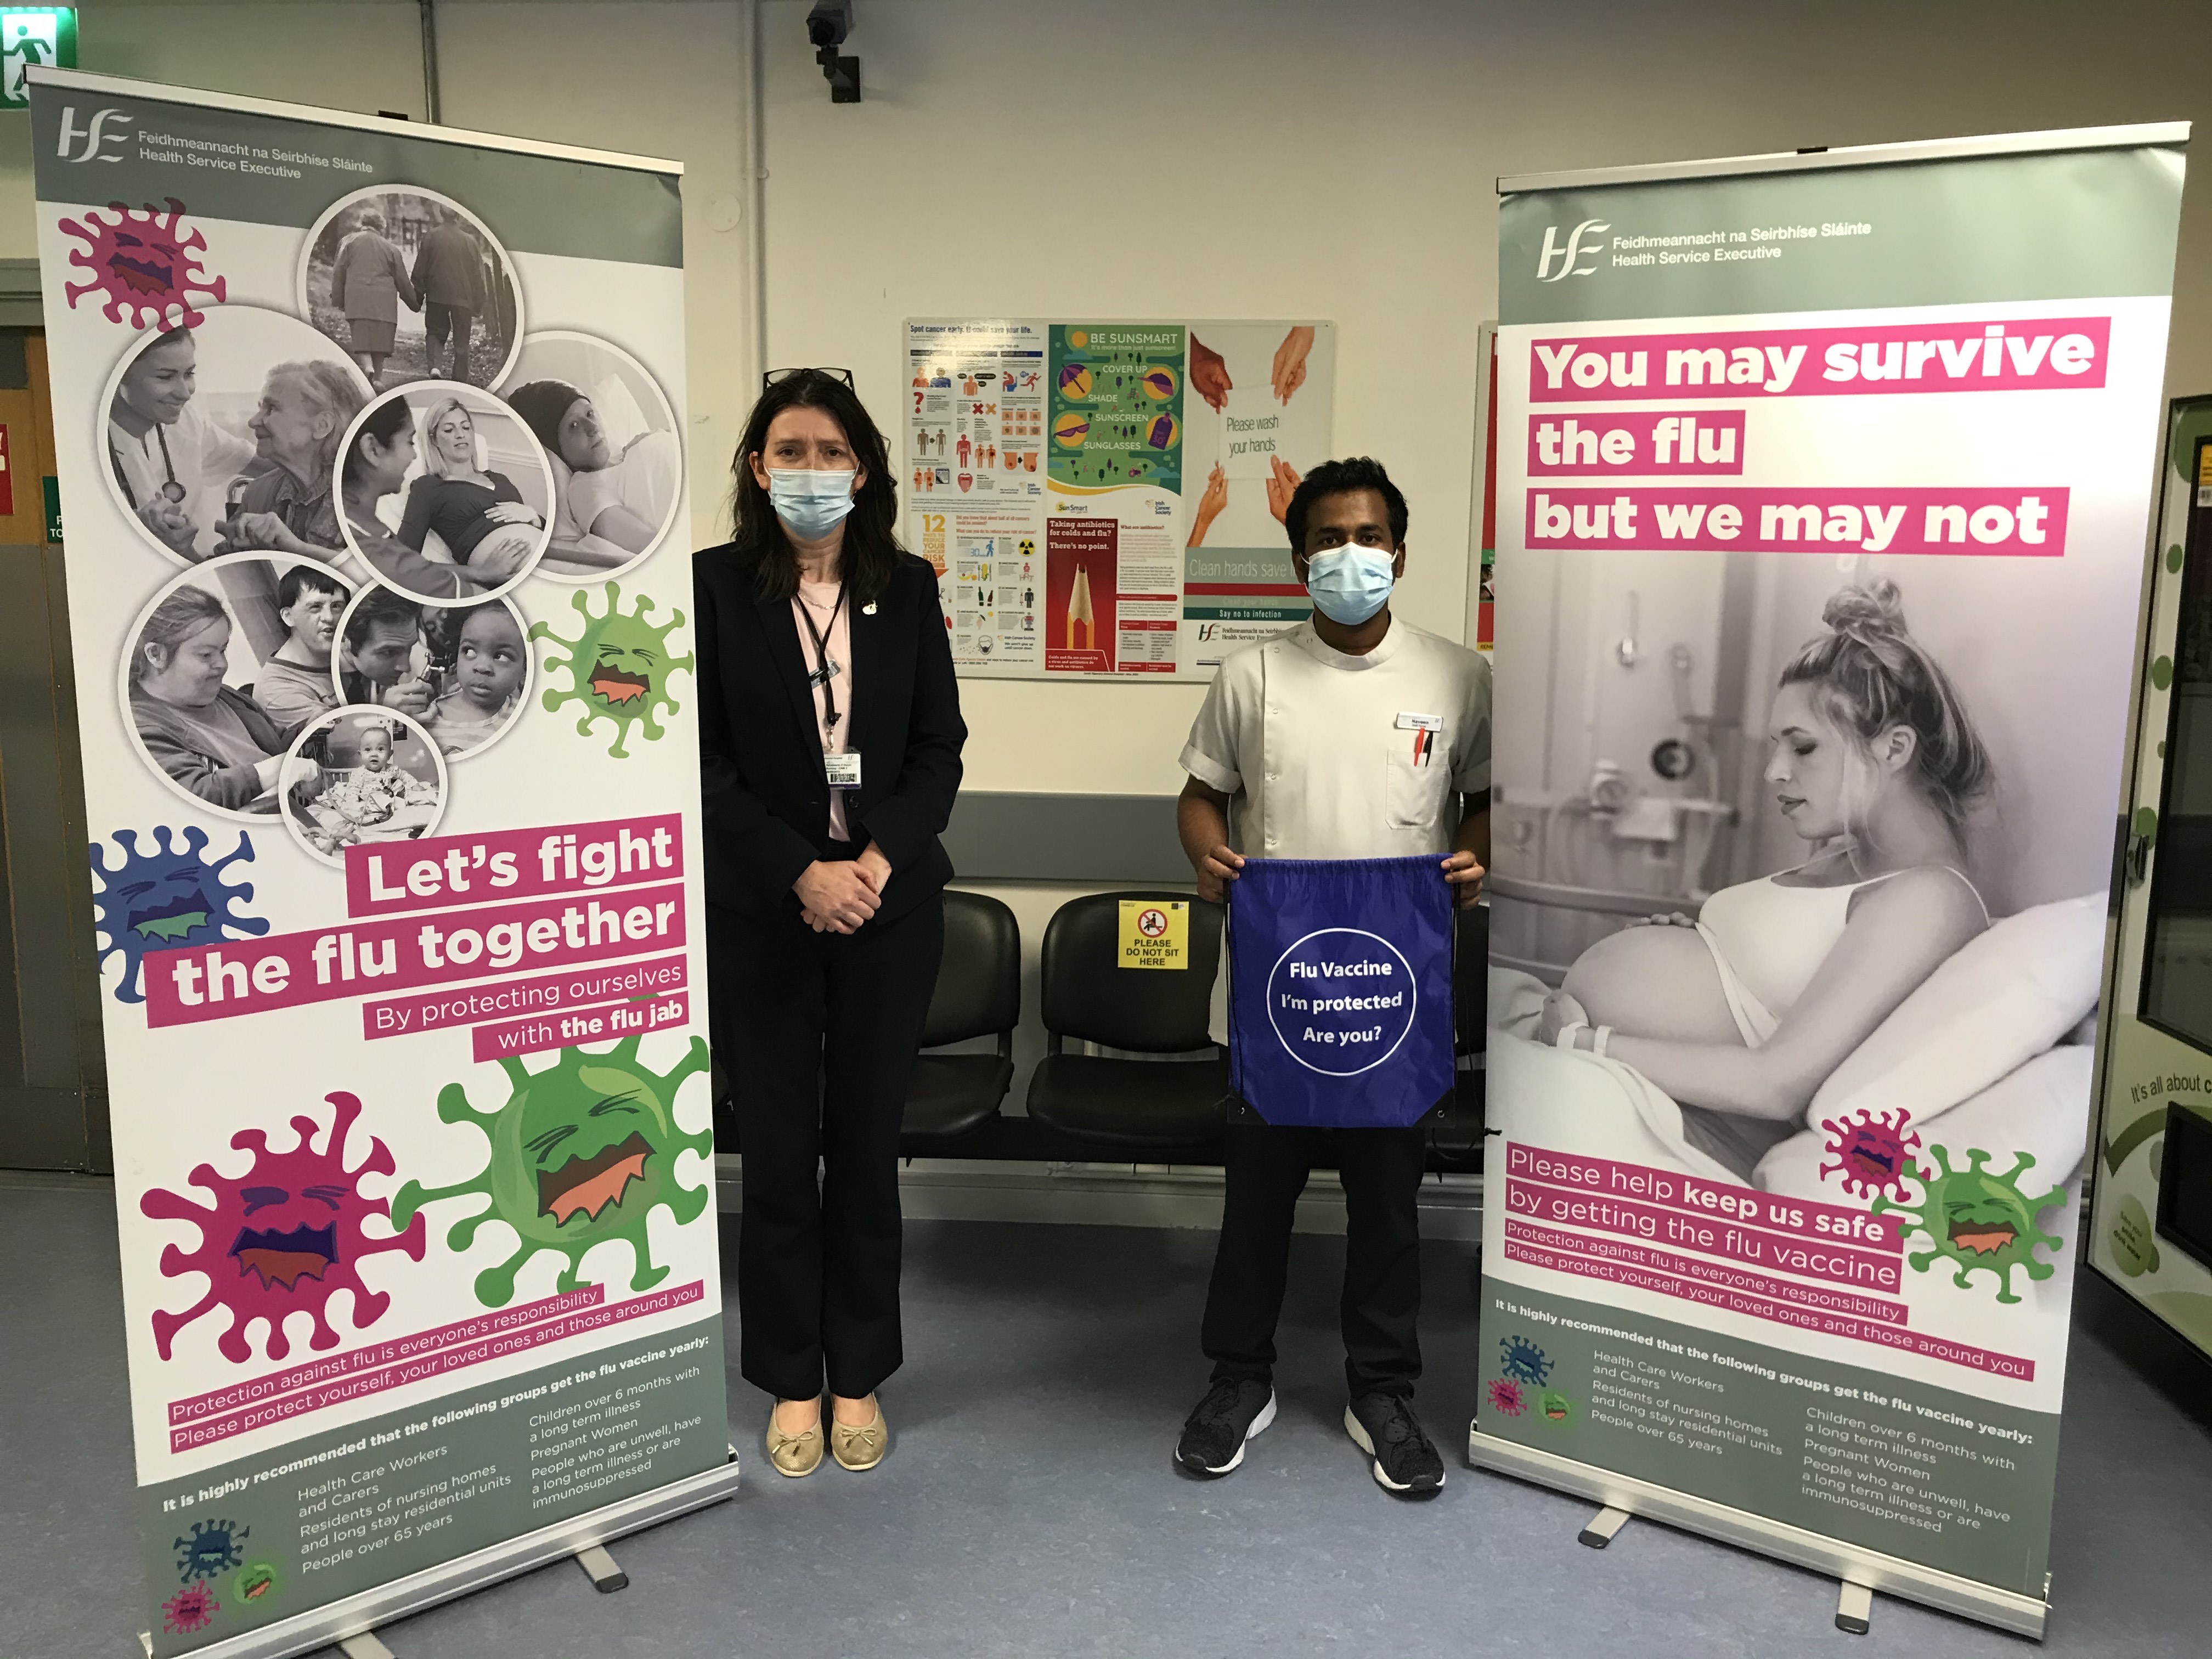 SUptake of the flu jab among staff rose by 24.5% to 58.3% for the 2019-2020 flu season. TJ White, Director of Nursing at the hospital, said the peer vaccinators among the staff were key to the success of the campaign.  The hospital used the Staff Wellness Day to promote the benefits of the vaccine and address any concerns that people had surrounding the flu jab. They regularly communicate with the staff with updates about the campaign.